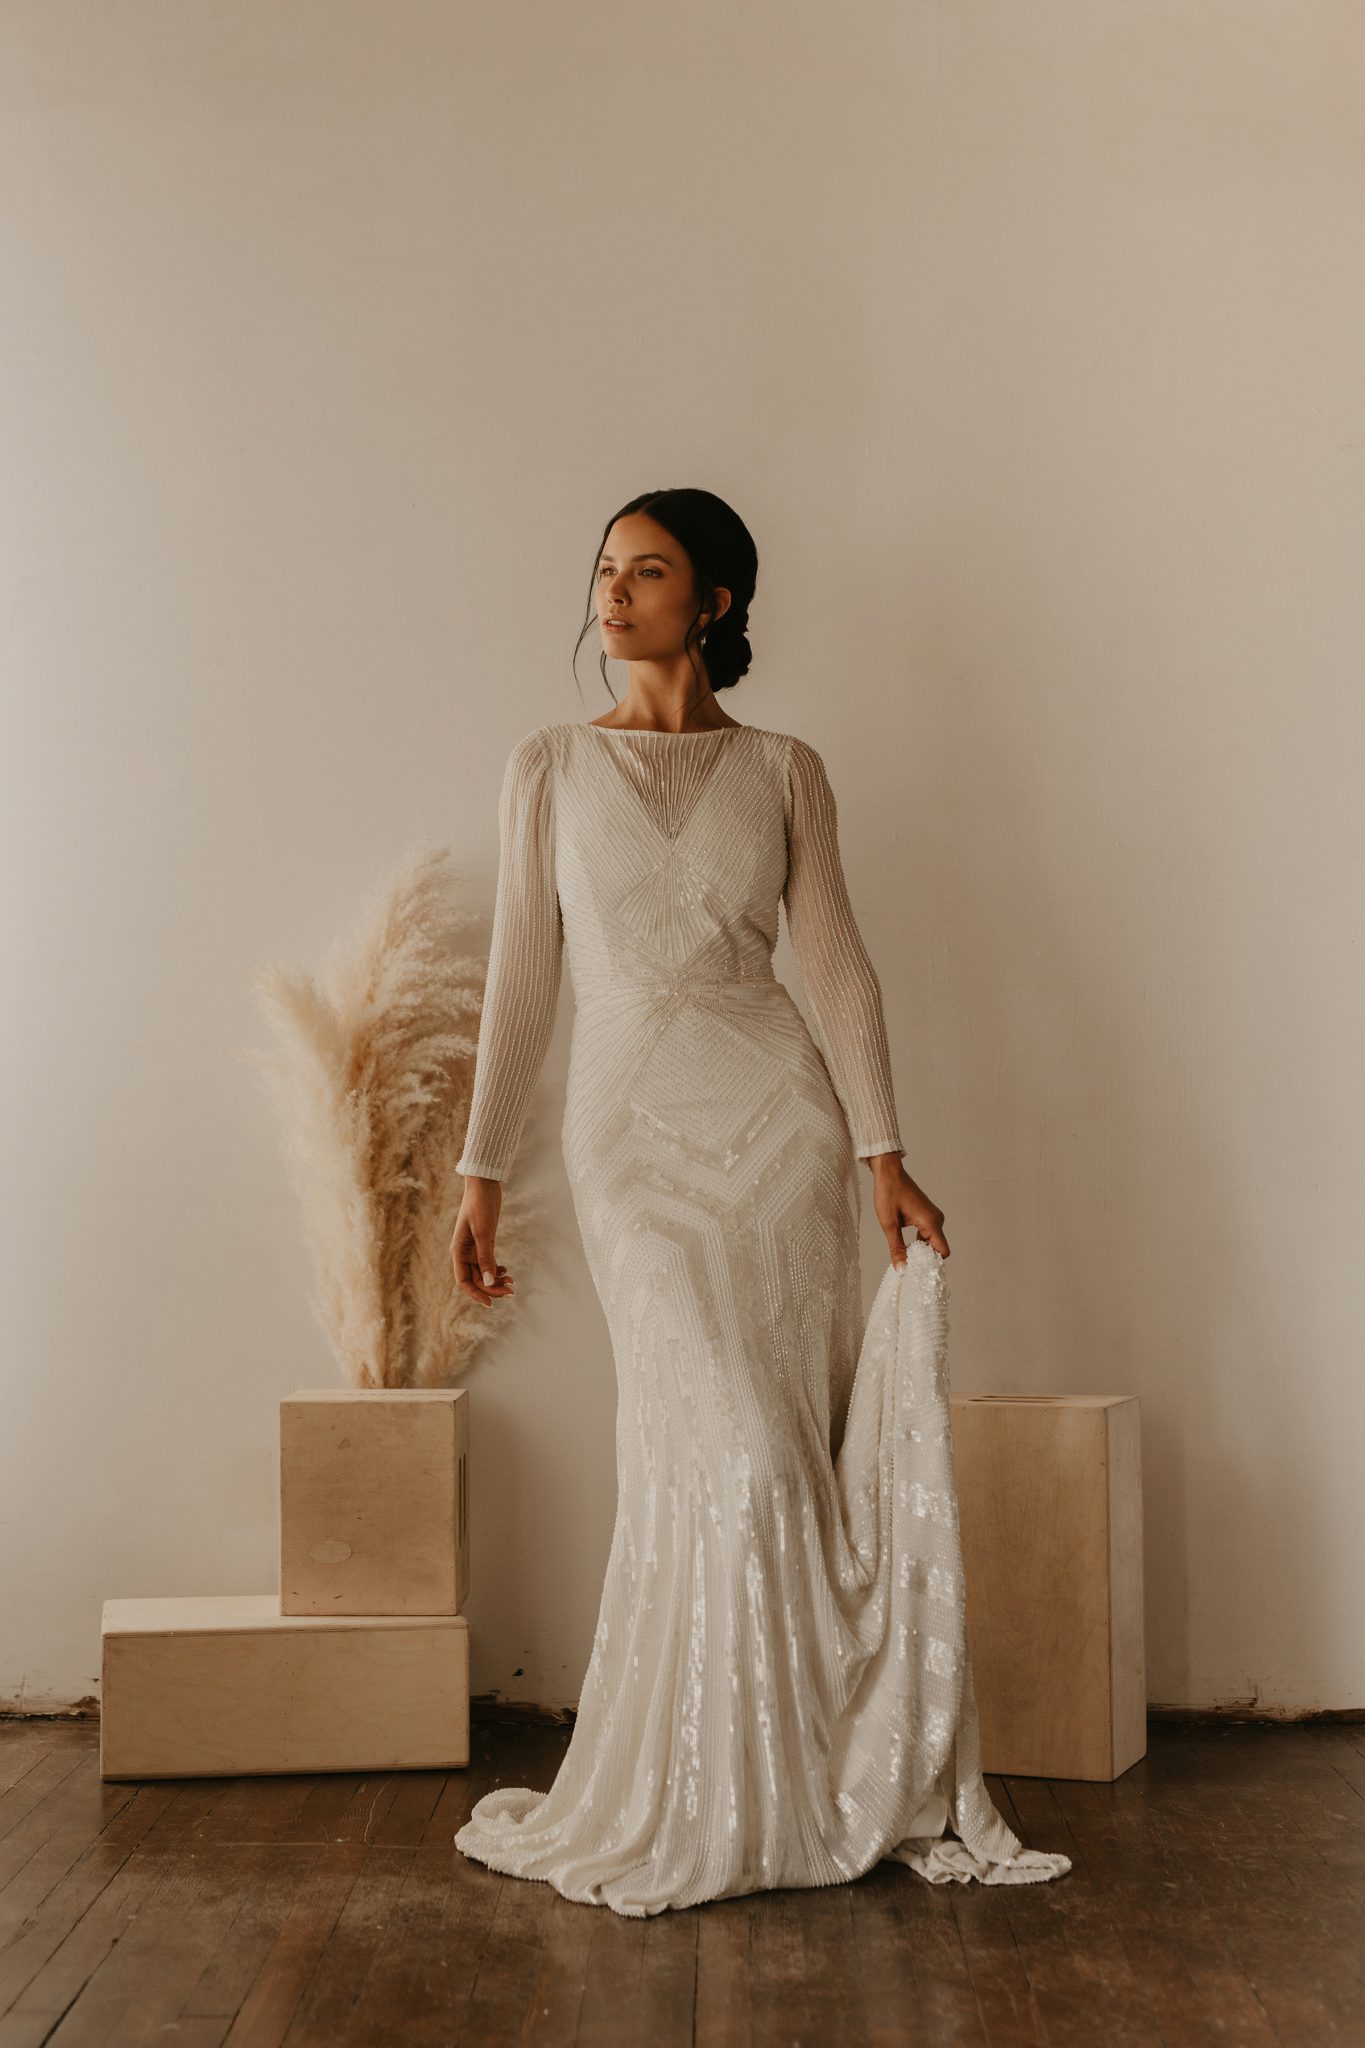 Bridal Minimalism Feature on Bronte Bride: Delica Bridal Shares All About New Bridal Trends & Dress Shopping During Covid, long sleeve wedding dress